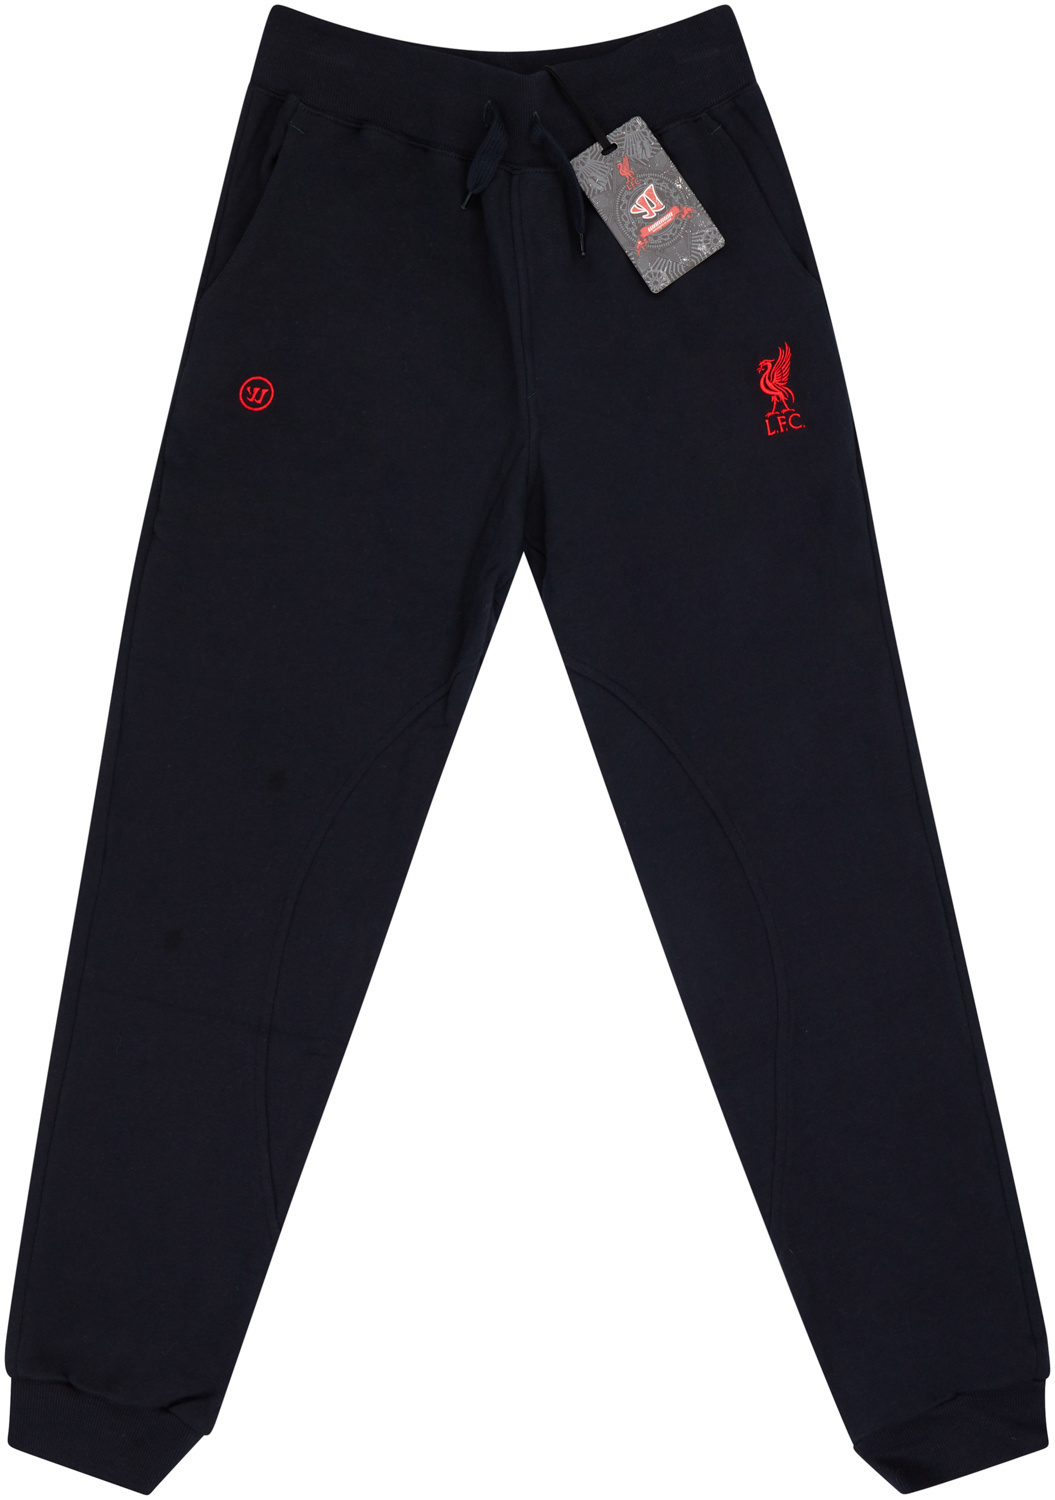 Buy Liverpool FC Red Track Pants  Track Pants for Men 1016809  Myntra